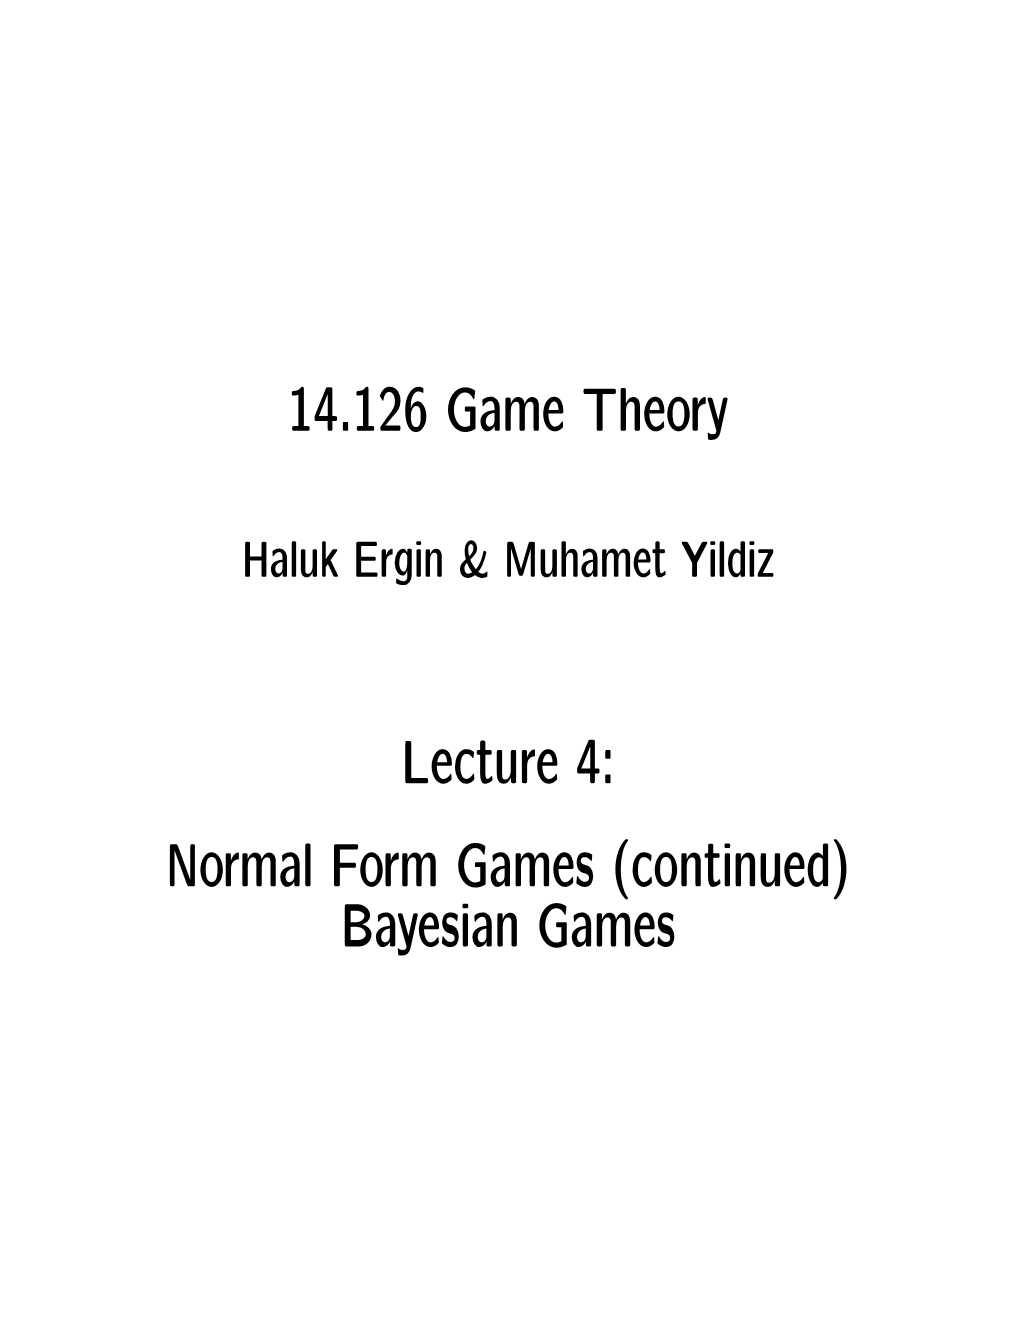 Lecture 4: Normal Form Games (Continued) Bayesian Games Rationalizability Ai Is Rationalizable If ∀J ∈ N , ∃ a Nonempty Zj ⊂ Aj S.T